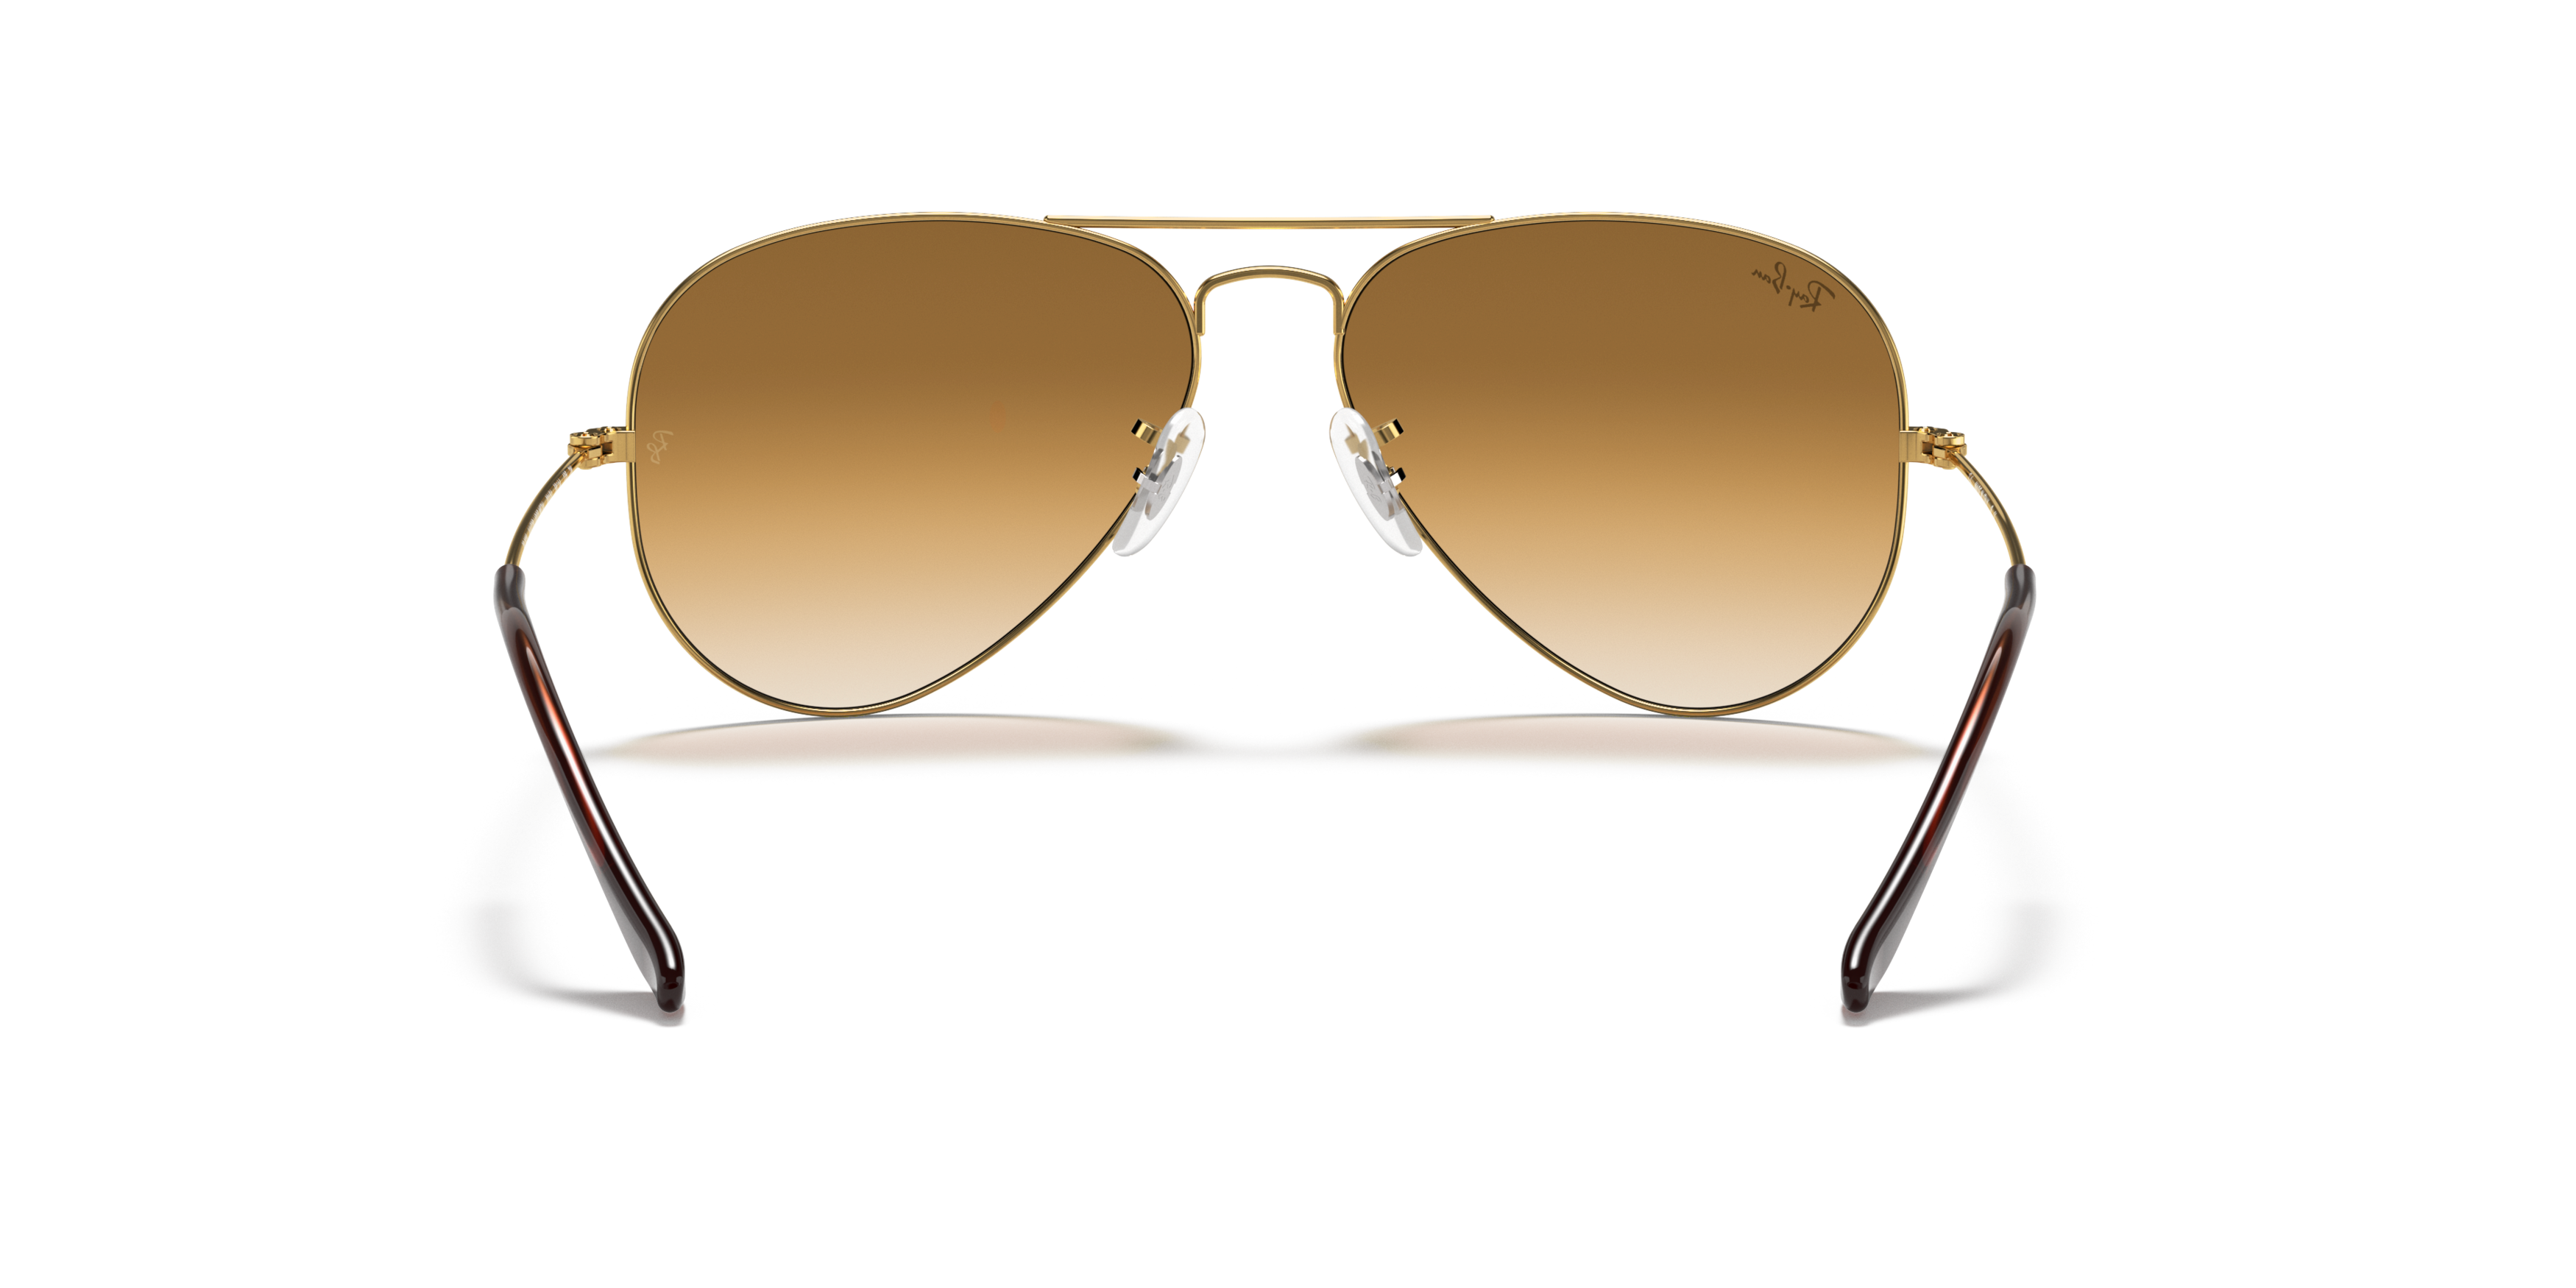 Detail02 Ray-Ban Aviator RB 3025 (001/51) Sunglasses Brown / Gold